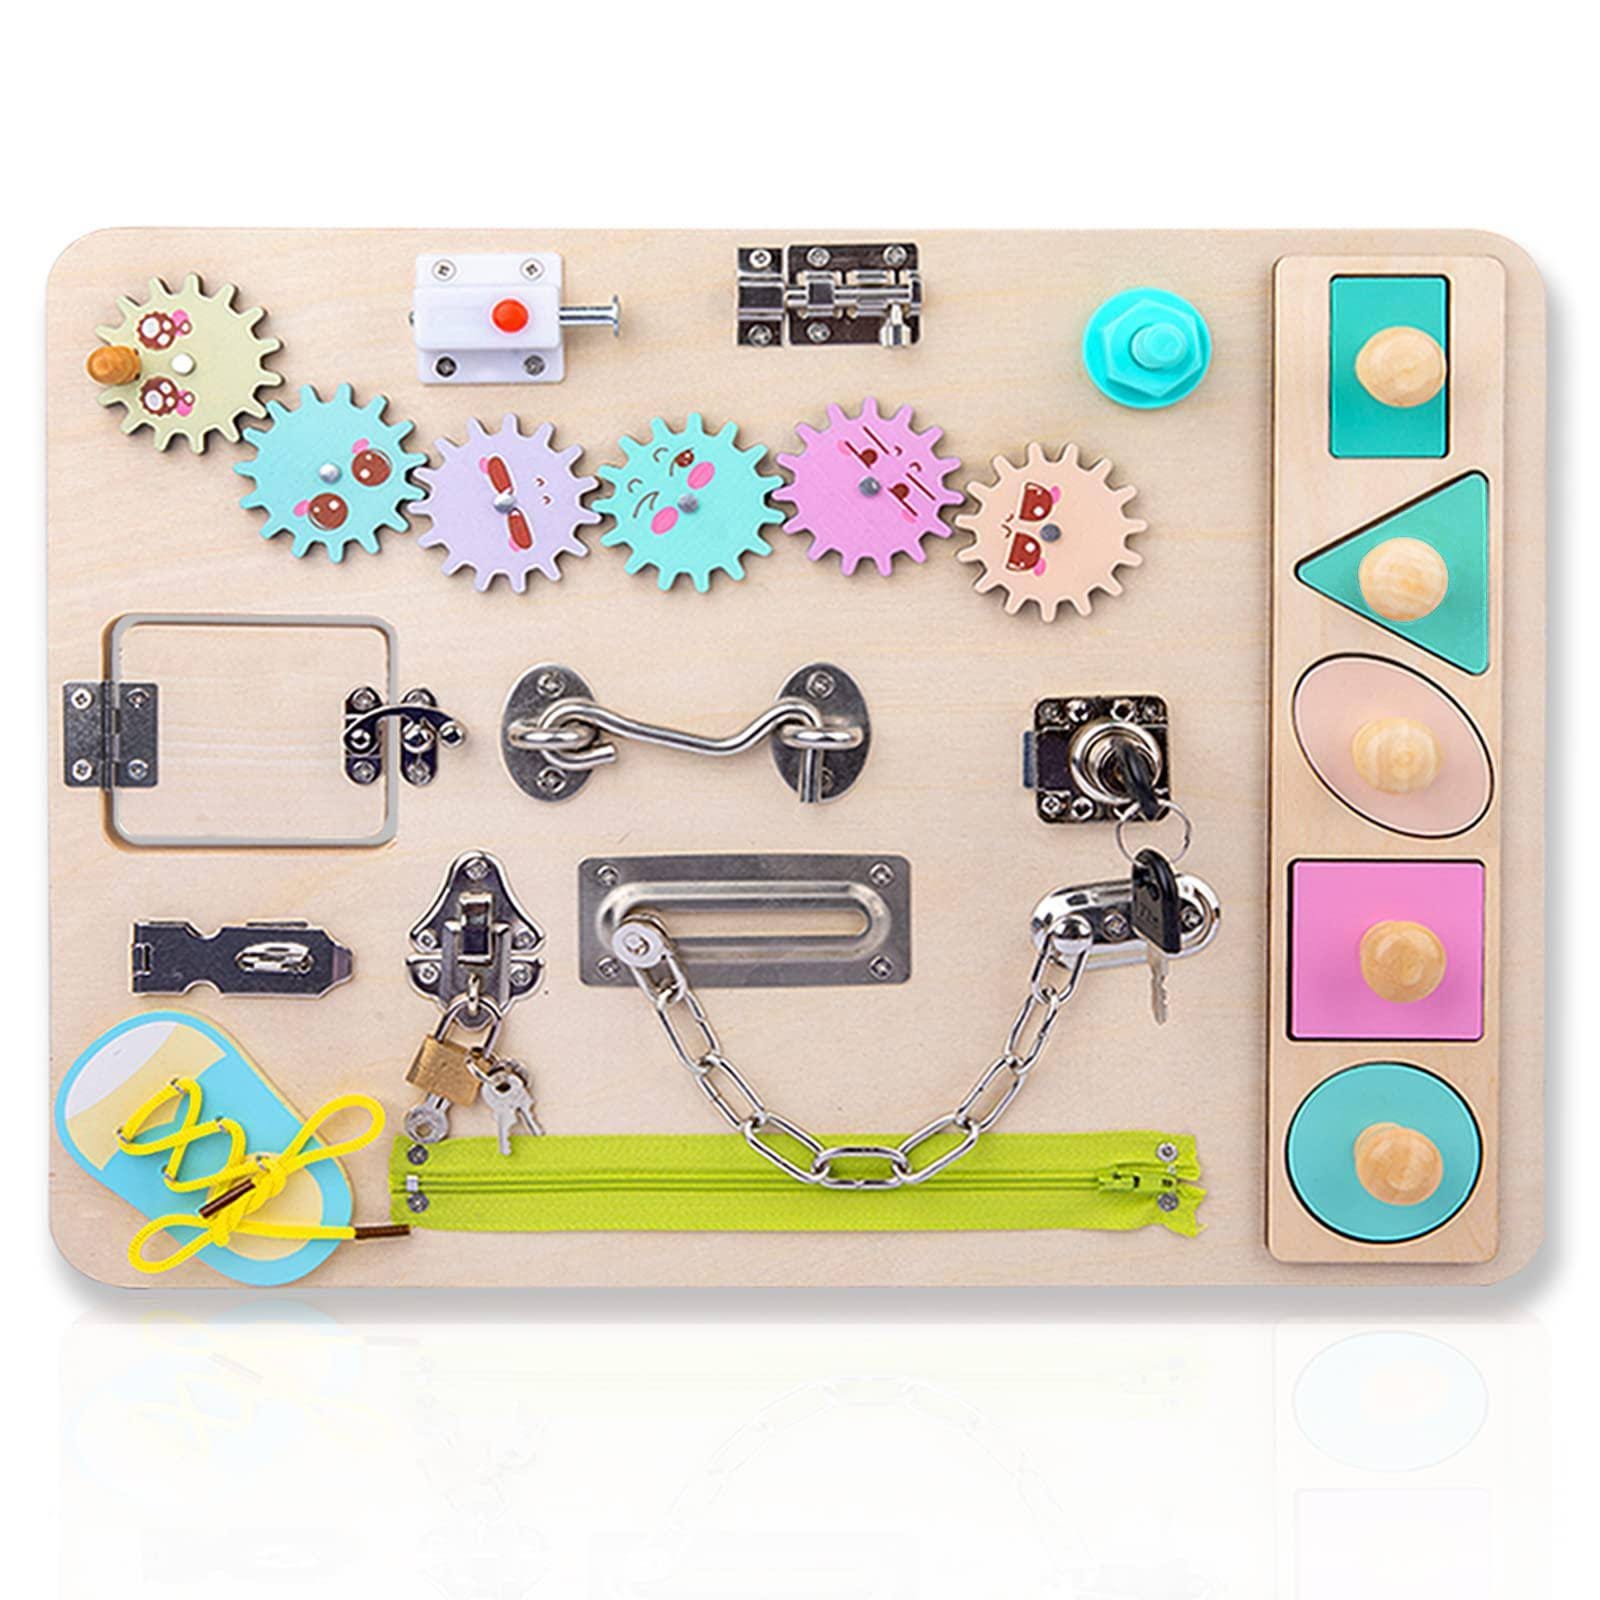 Montessori Busy Board for Toddlers: Educational Wooden Sensory Toy for Hand-Eye Coordination and Motor Skills Development | Image